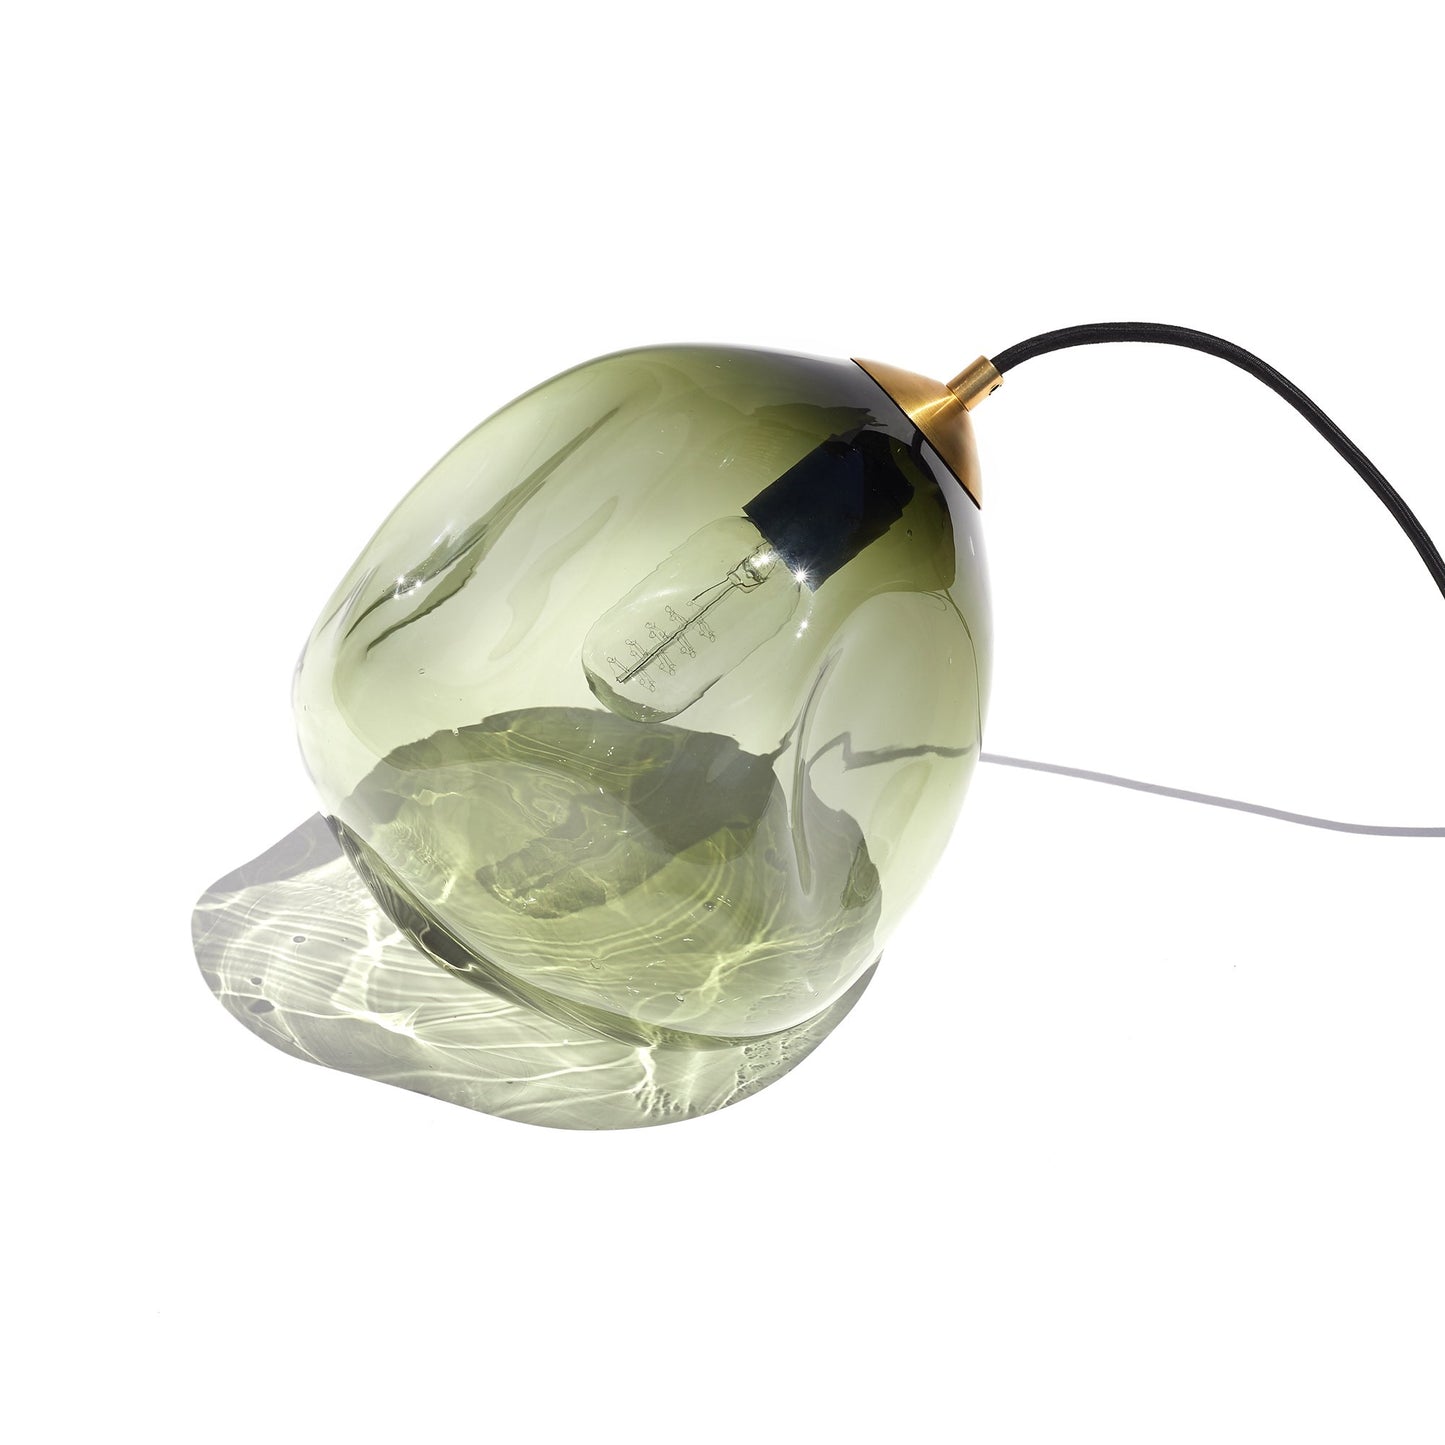 Deflated Lamp / Pendant - Large (33cm) - Eel Green - made to order